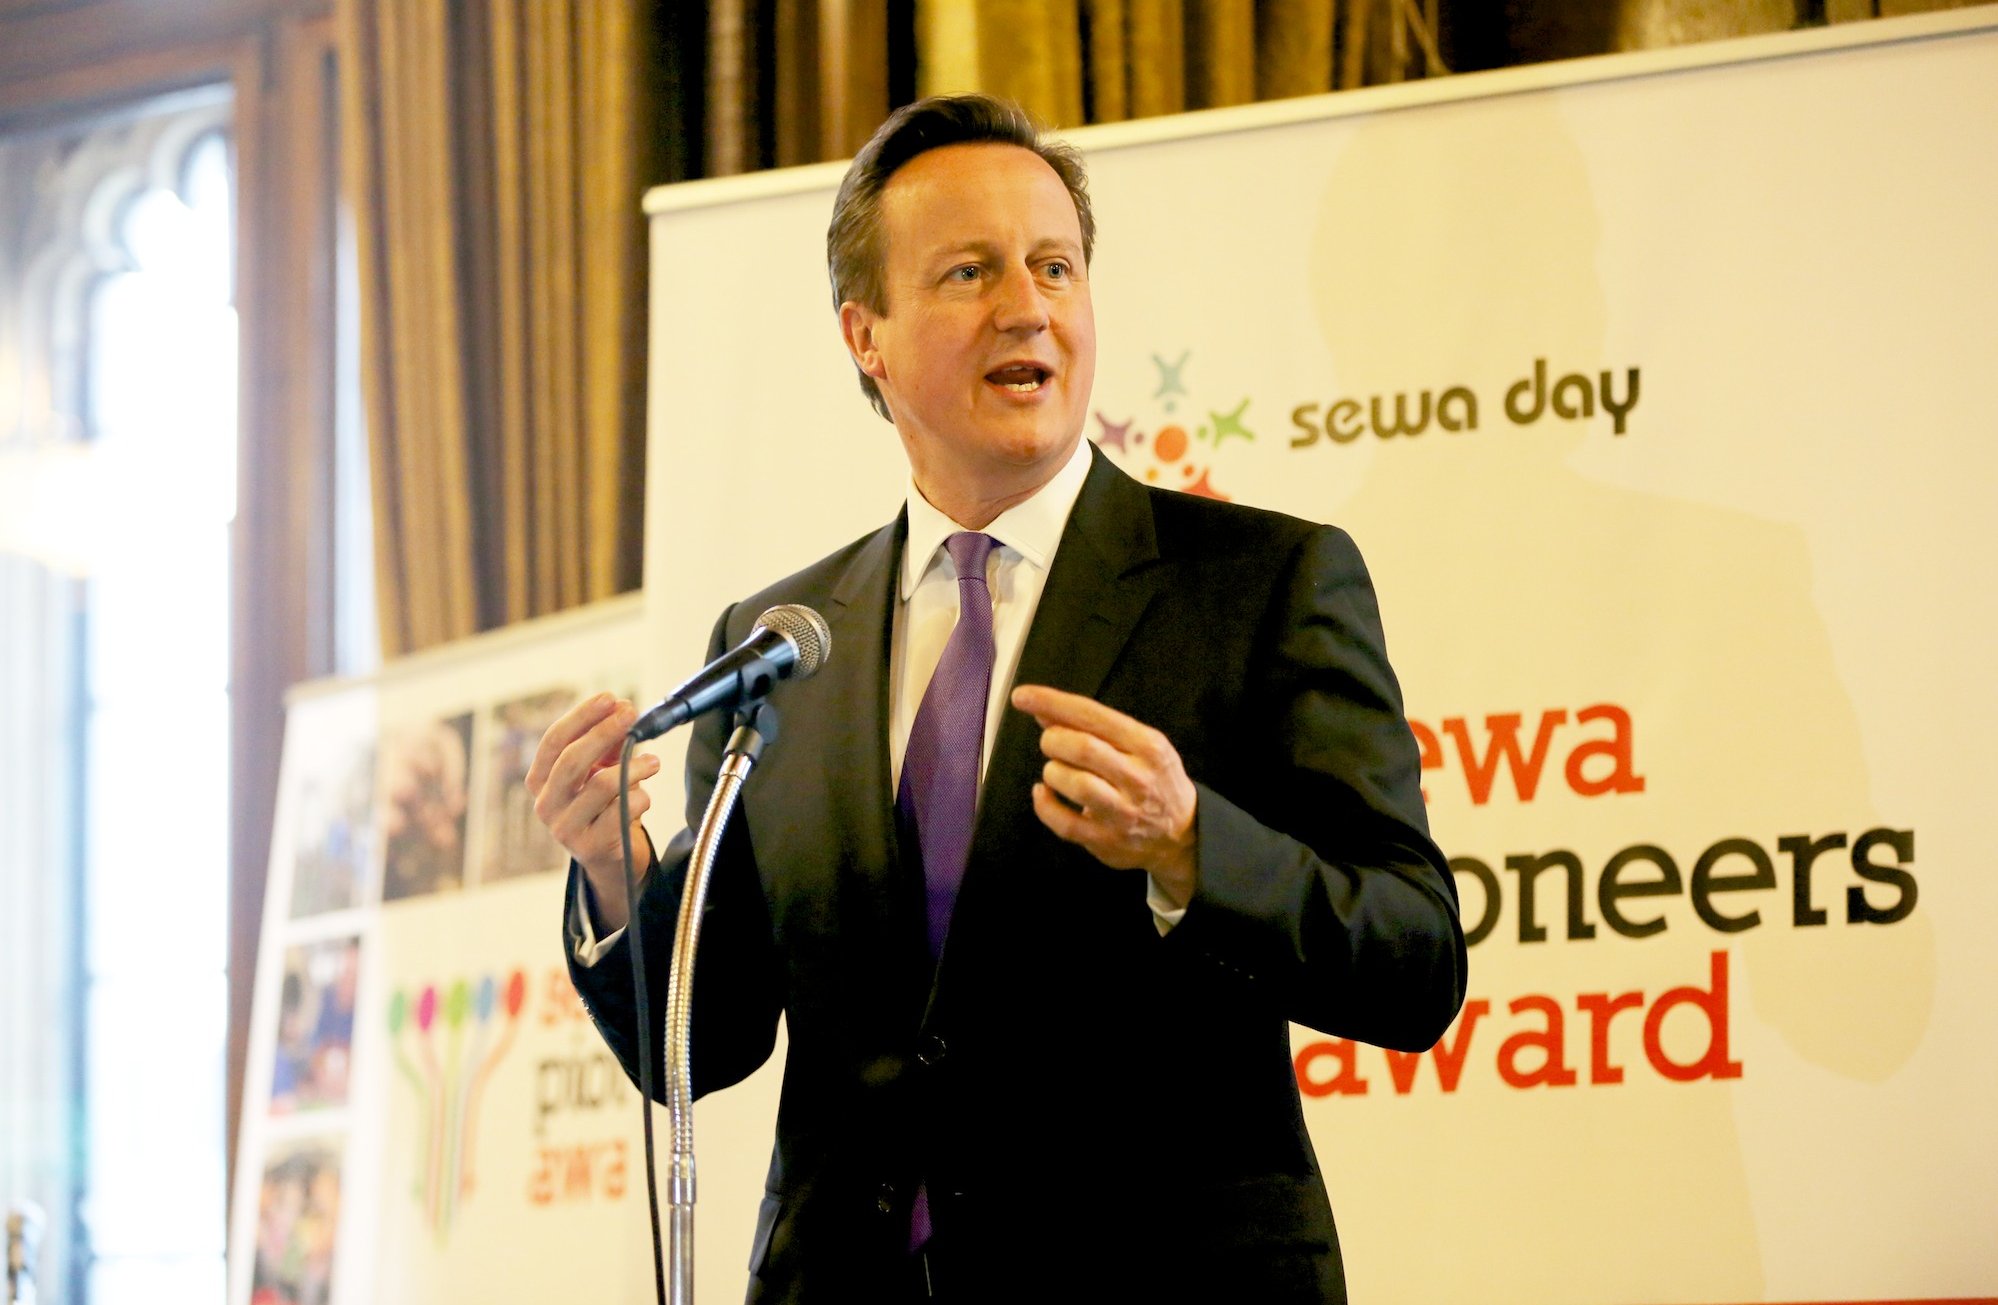 UK Prime Minister David Cameron attended the Sewa Pioneers Awards reception to recognise a new generation of social action volunteers.